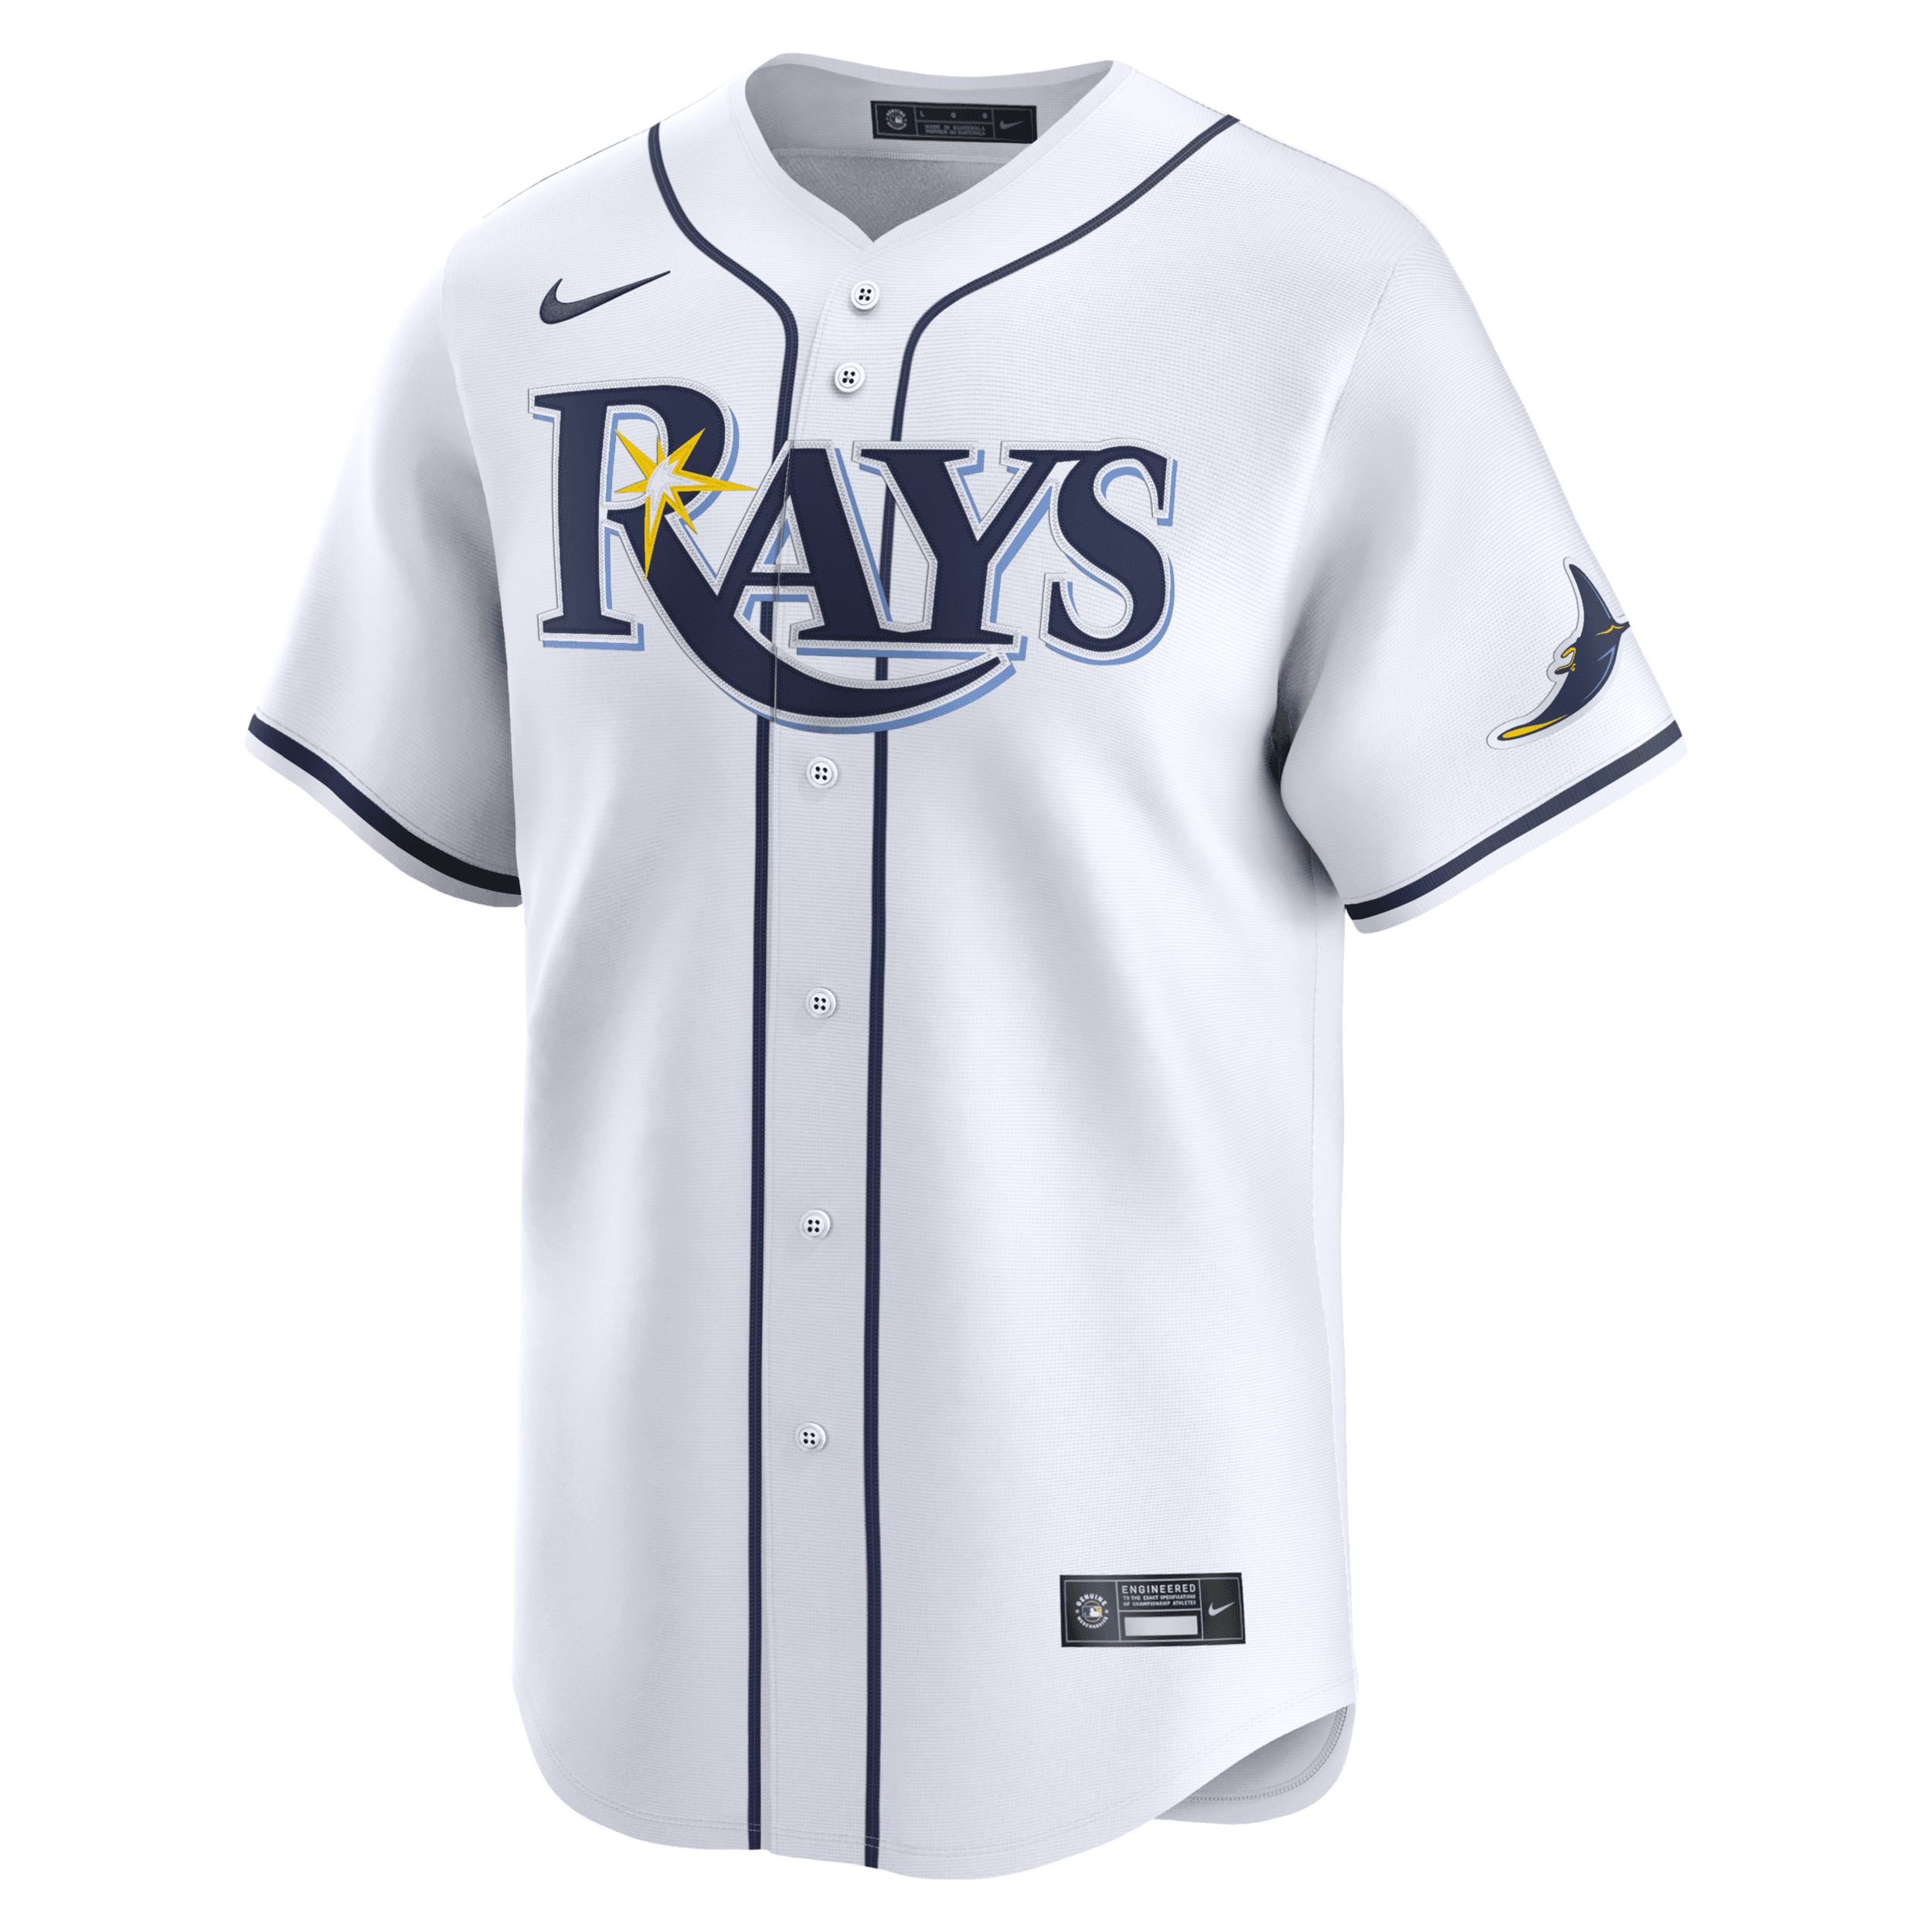 Nike Wander Franco Tampa Bay Rays  Men's Dri-fit Adv Mlb Limited Jersey In White